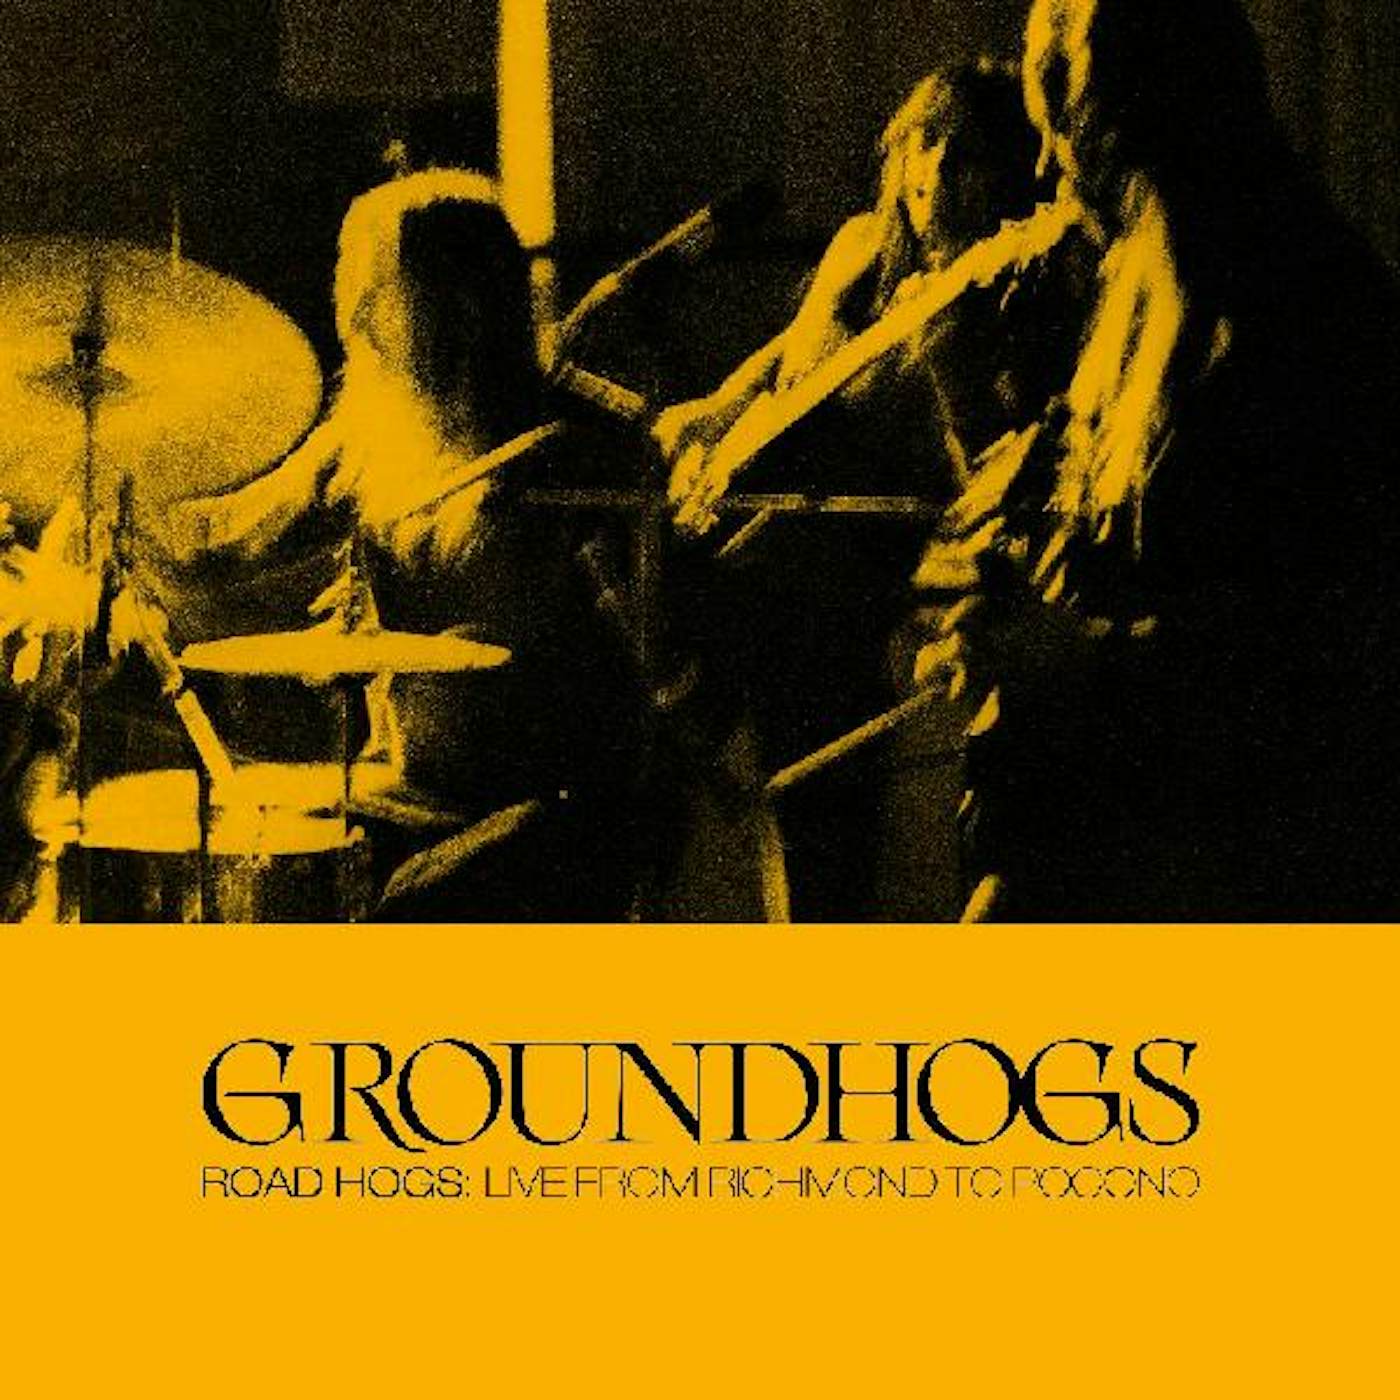 The Groundhogs ROADHOGS: LIVE FROM RICHMOND TO POCON CD